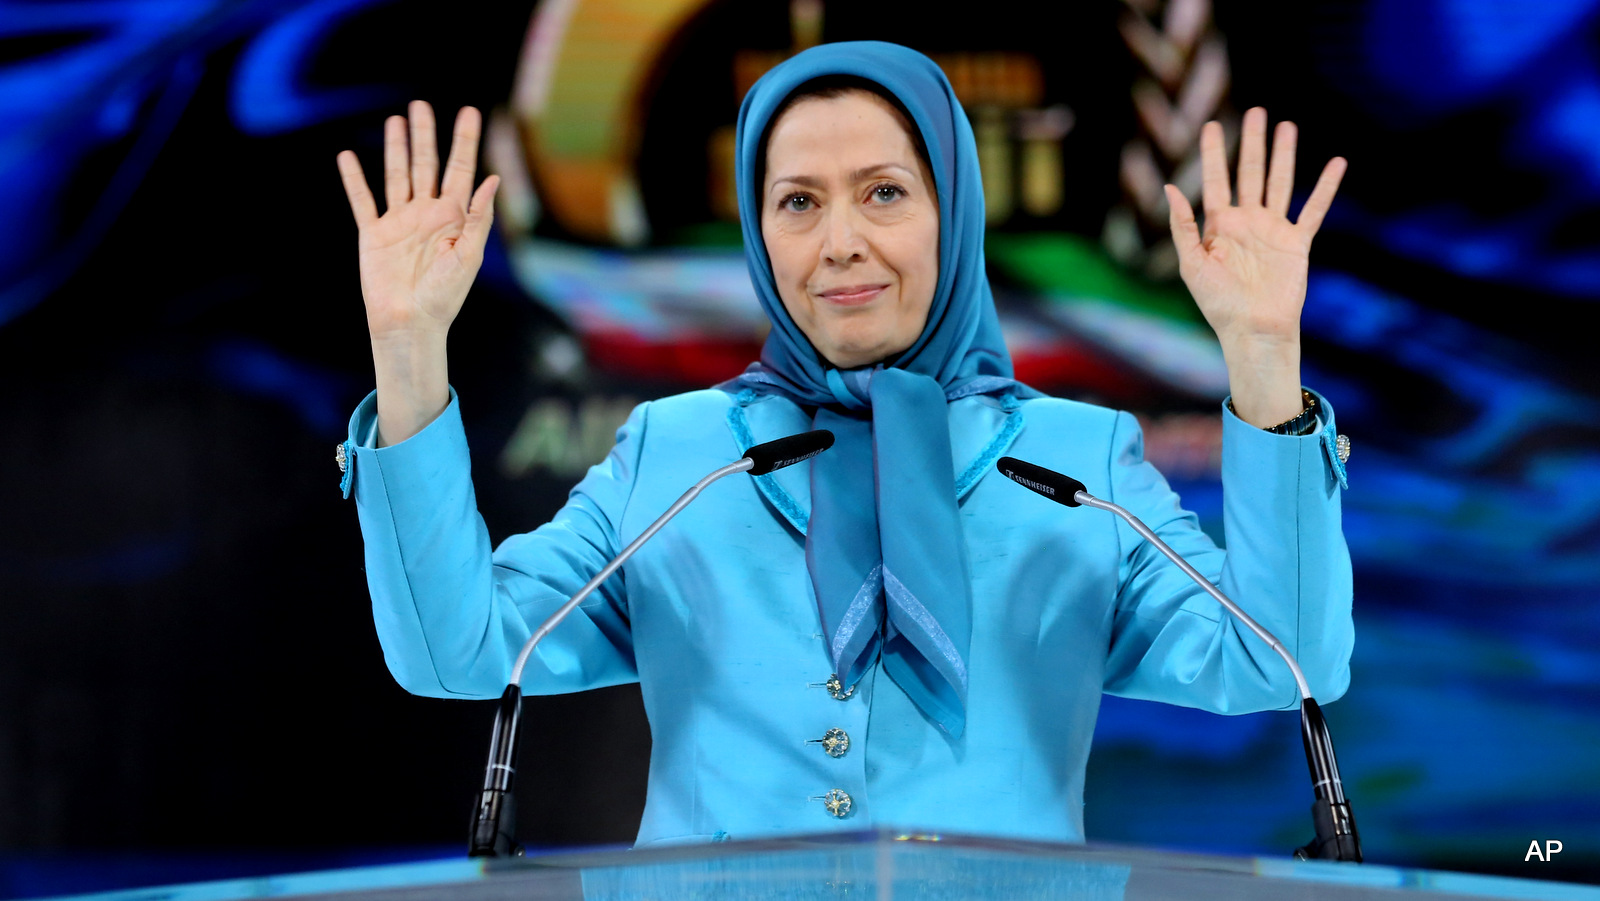 Maryam Rajavi, former leader of the MEK and current leader of the National Council of Resistance of Iran, waves to the audience as she addresses thousands of exiled Iranians in Villepinte, north of Paris, Friday June 27, 2014.